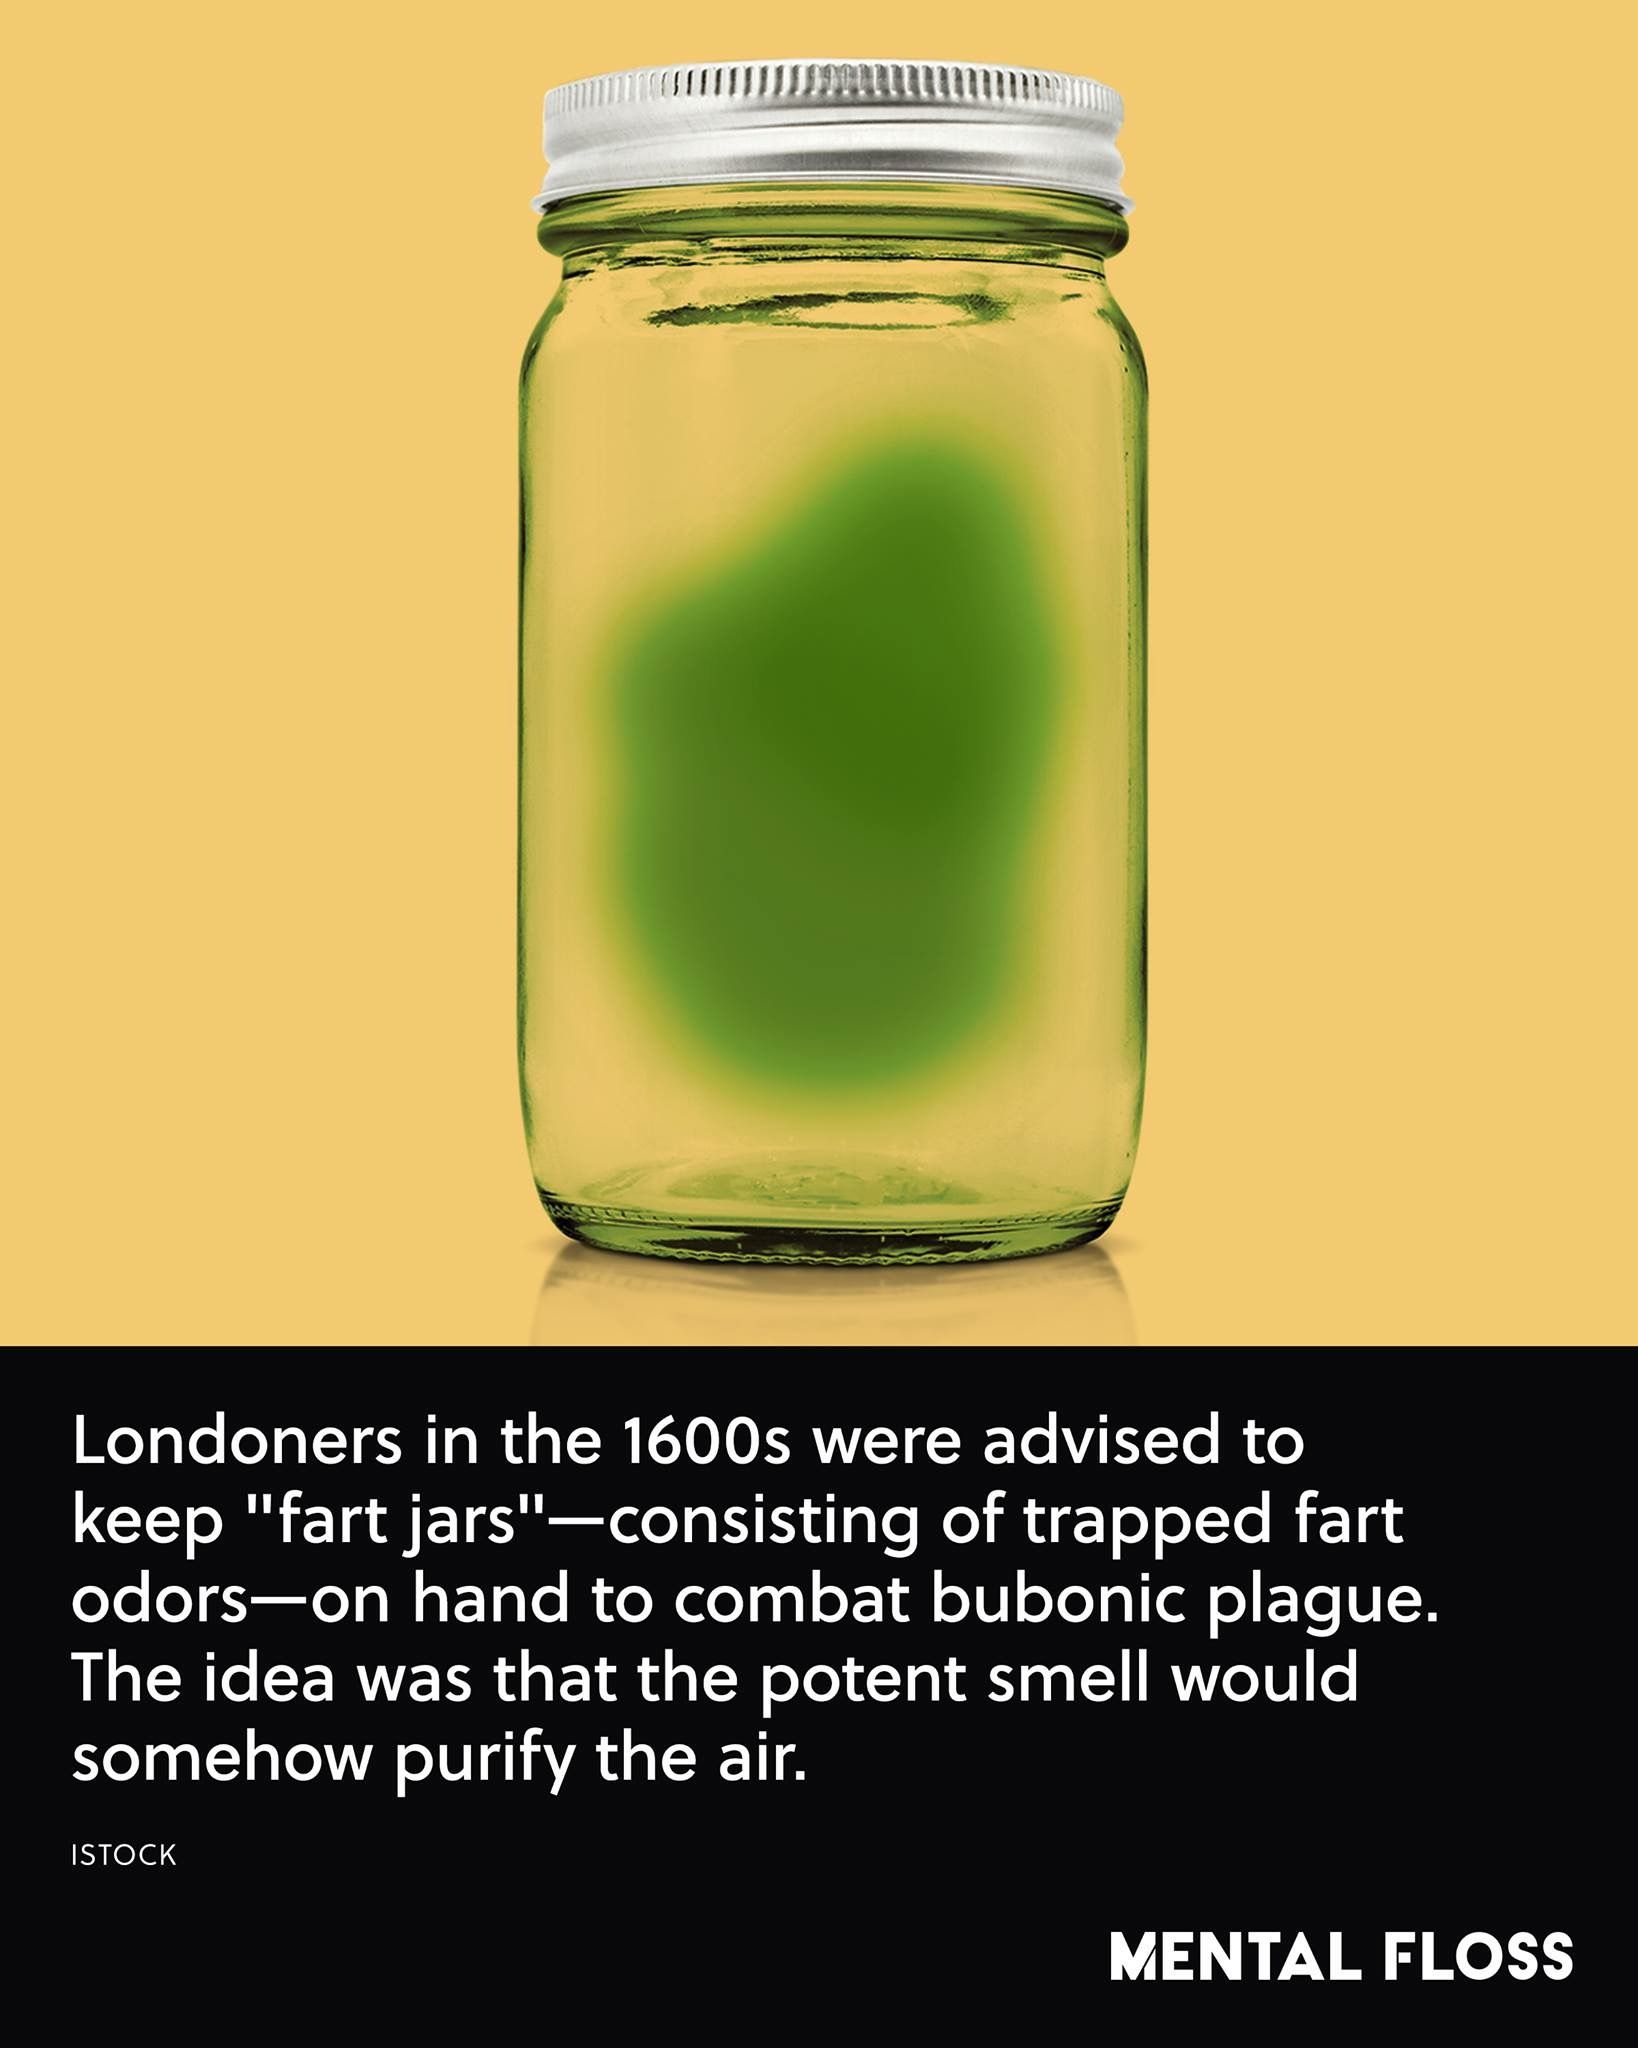 mason jar - Londoners in the 1600s were advised to keep "fart jars"consisting of trapped fart odorson hand to combat bubonic plague. The idea was that the potent smell would somehow purify the air. Istock Mental Floss